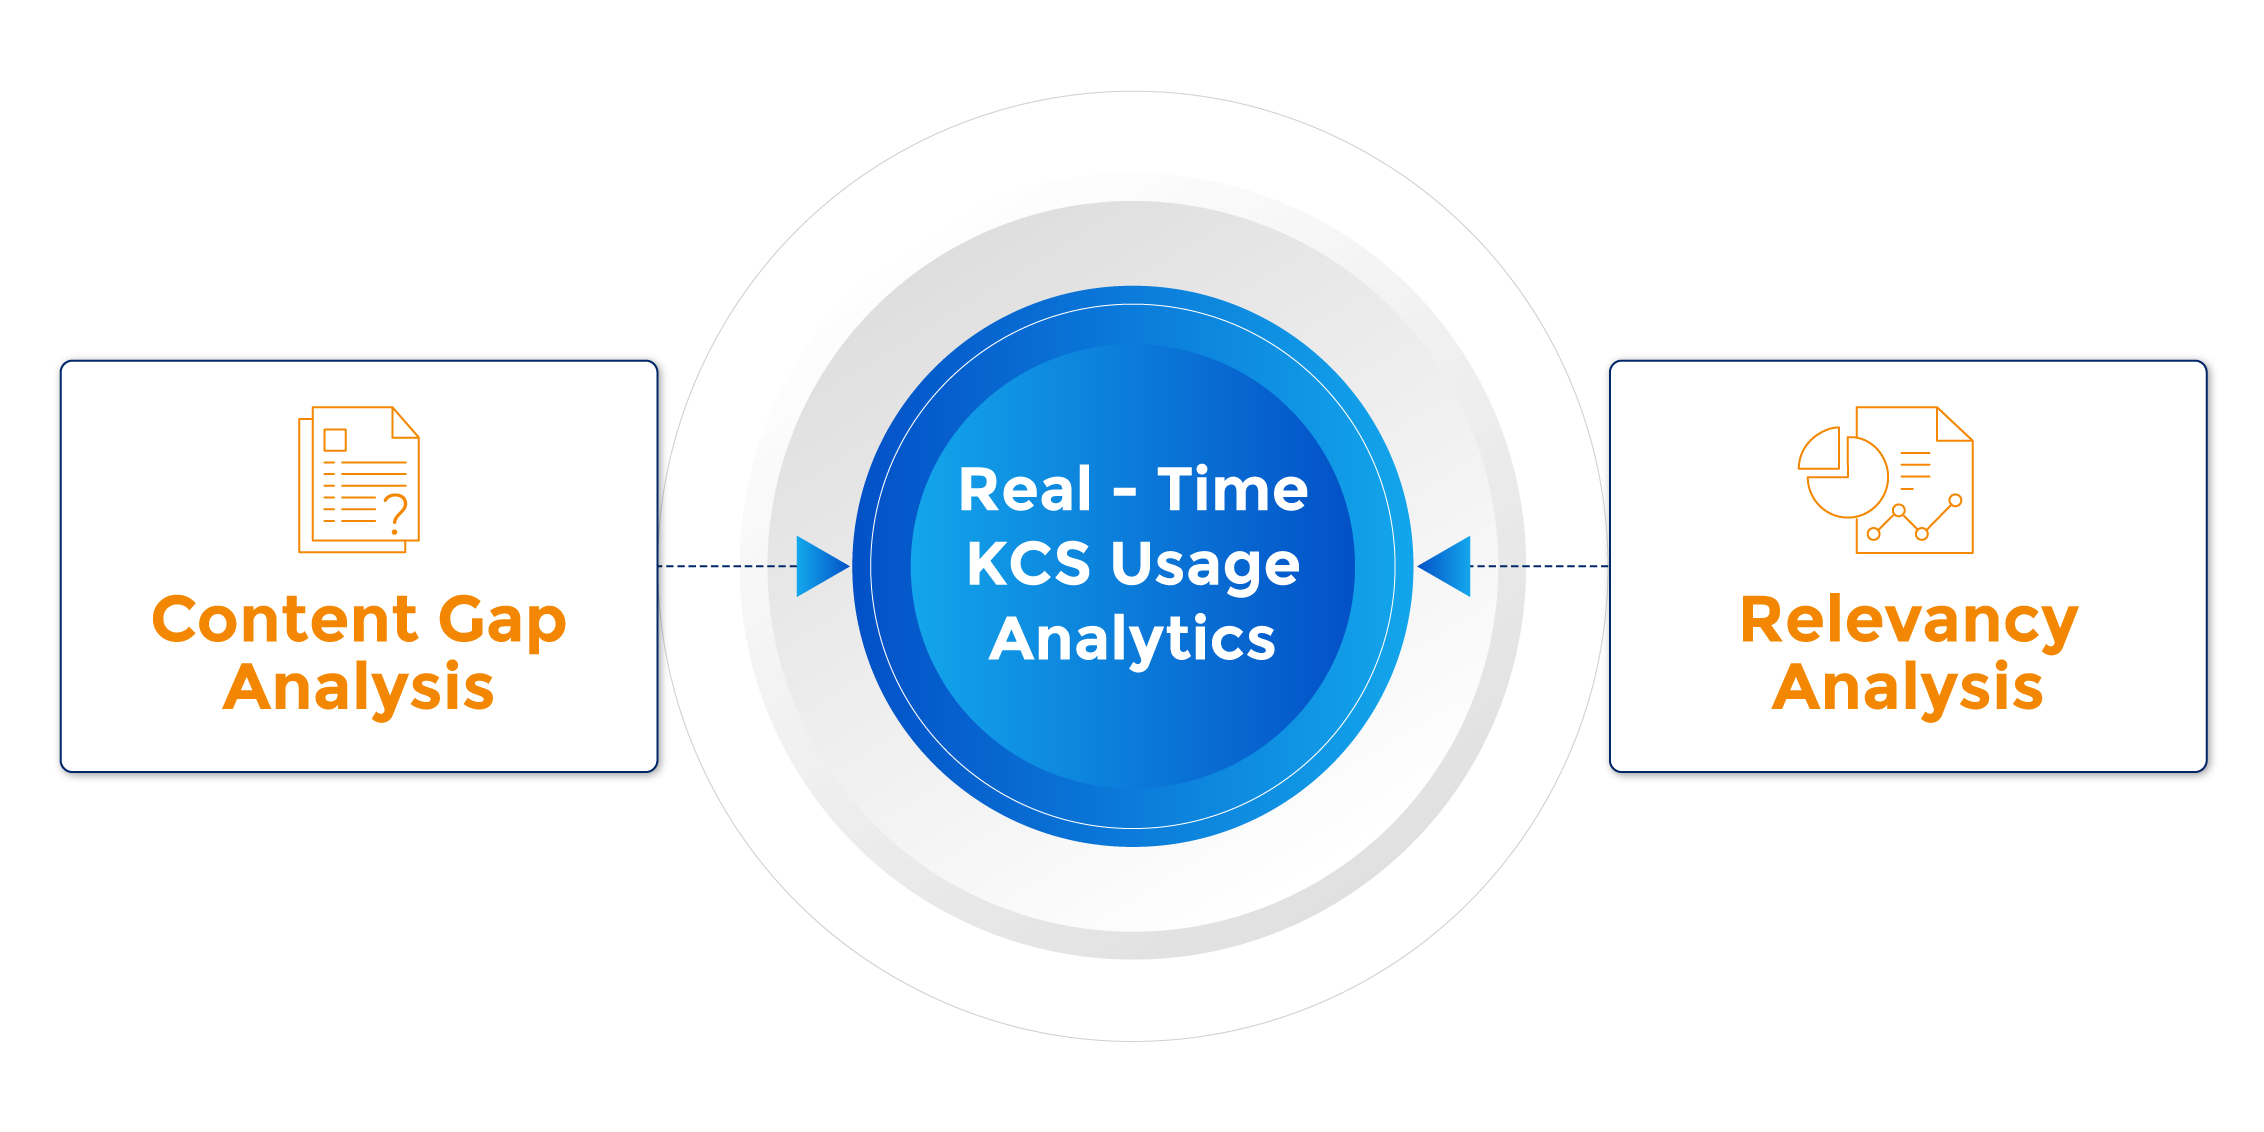 Climbing the Stairway to KM Success with Real-time KCS Insights